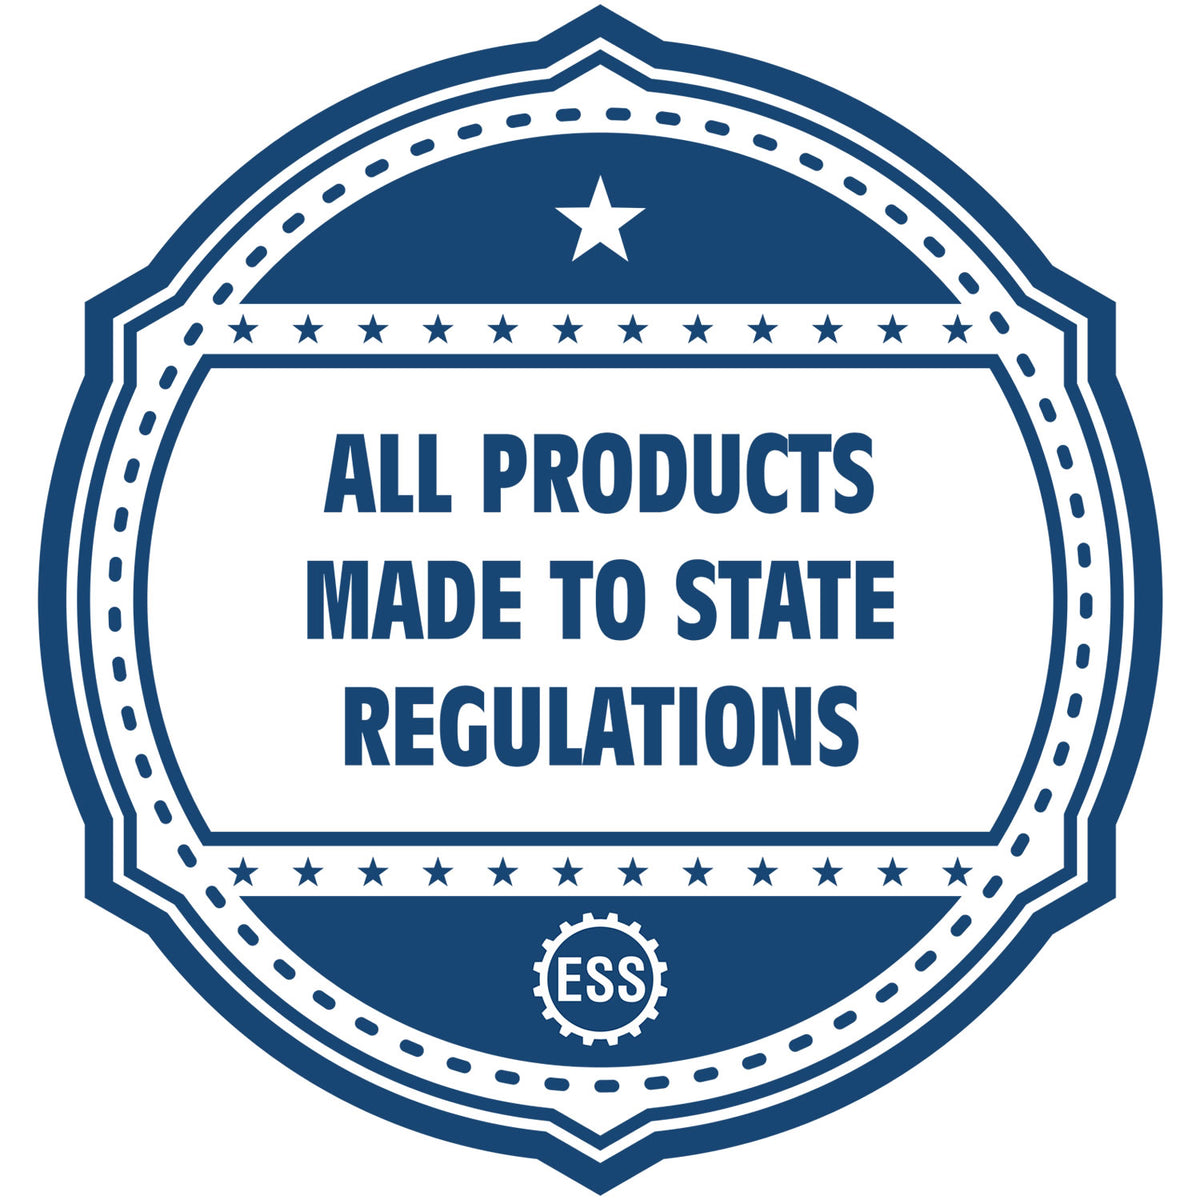 An icon or badge element for the Slim Pre-Inked West Virginia Architect Seal Stamp showing that this product is made in compliance with state regulations.